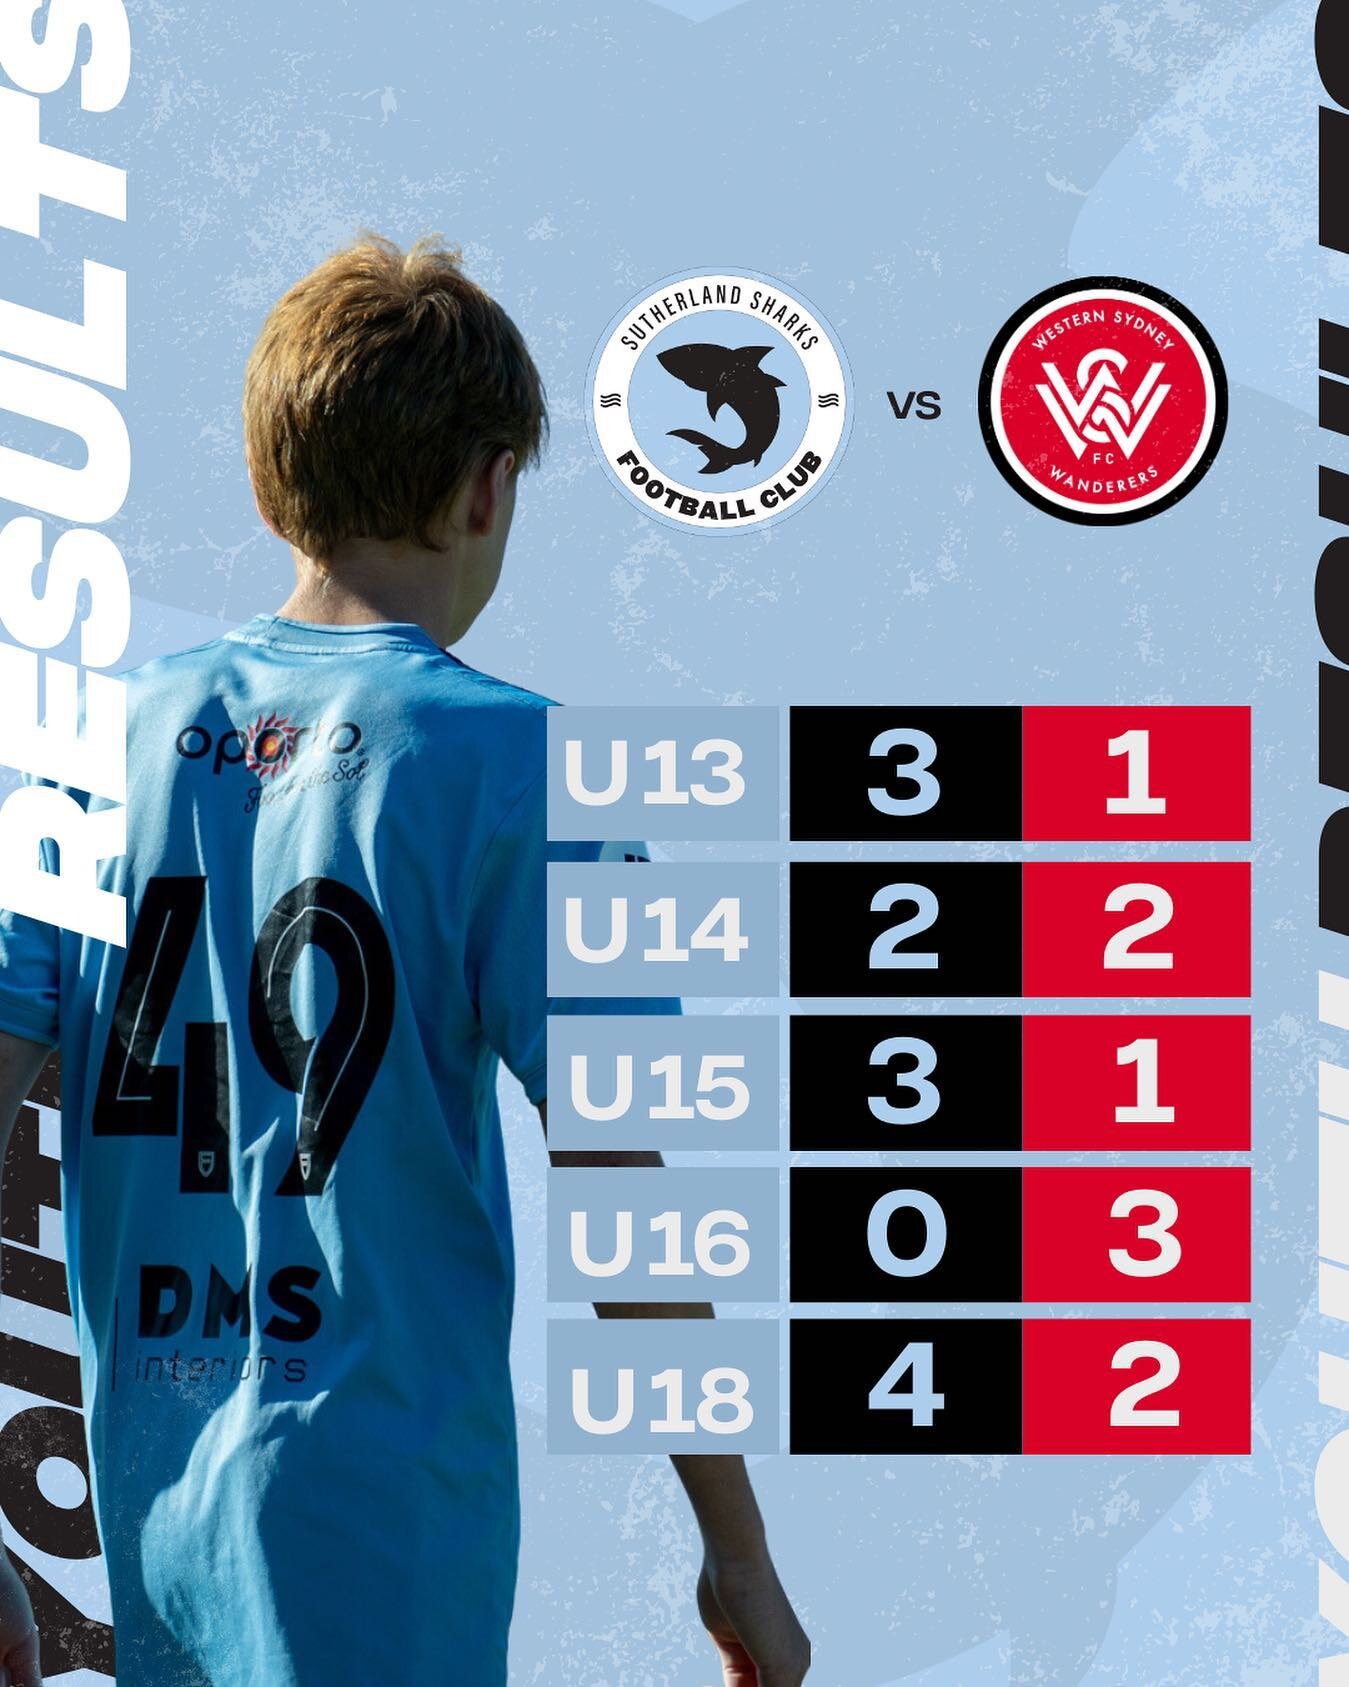 Youth results from the past weekend at home vs Wanderers. Nice work lads 👏